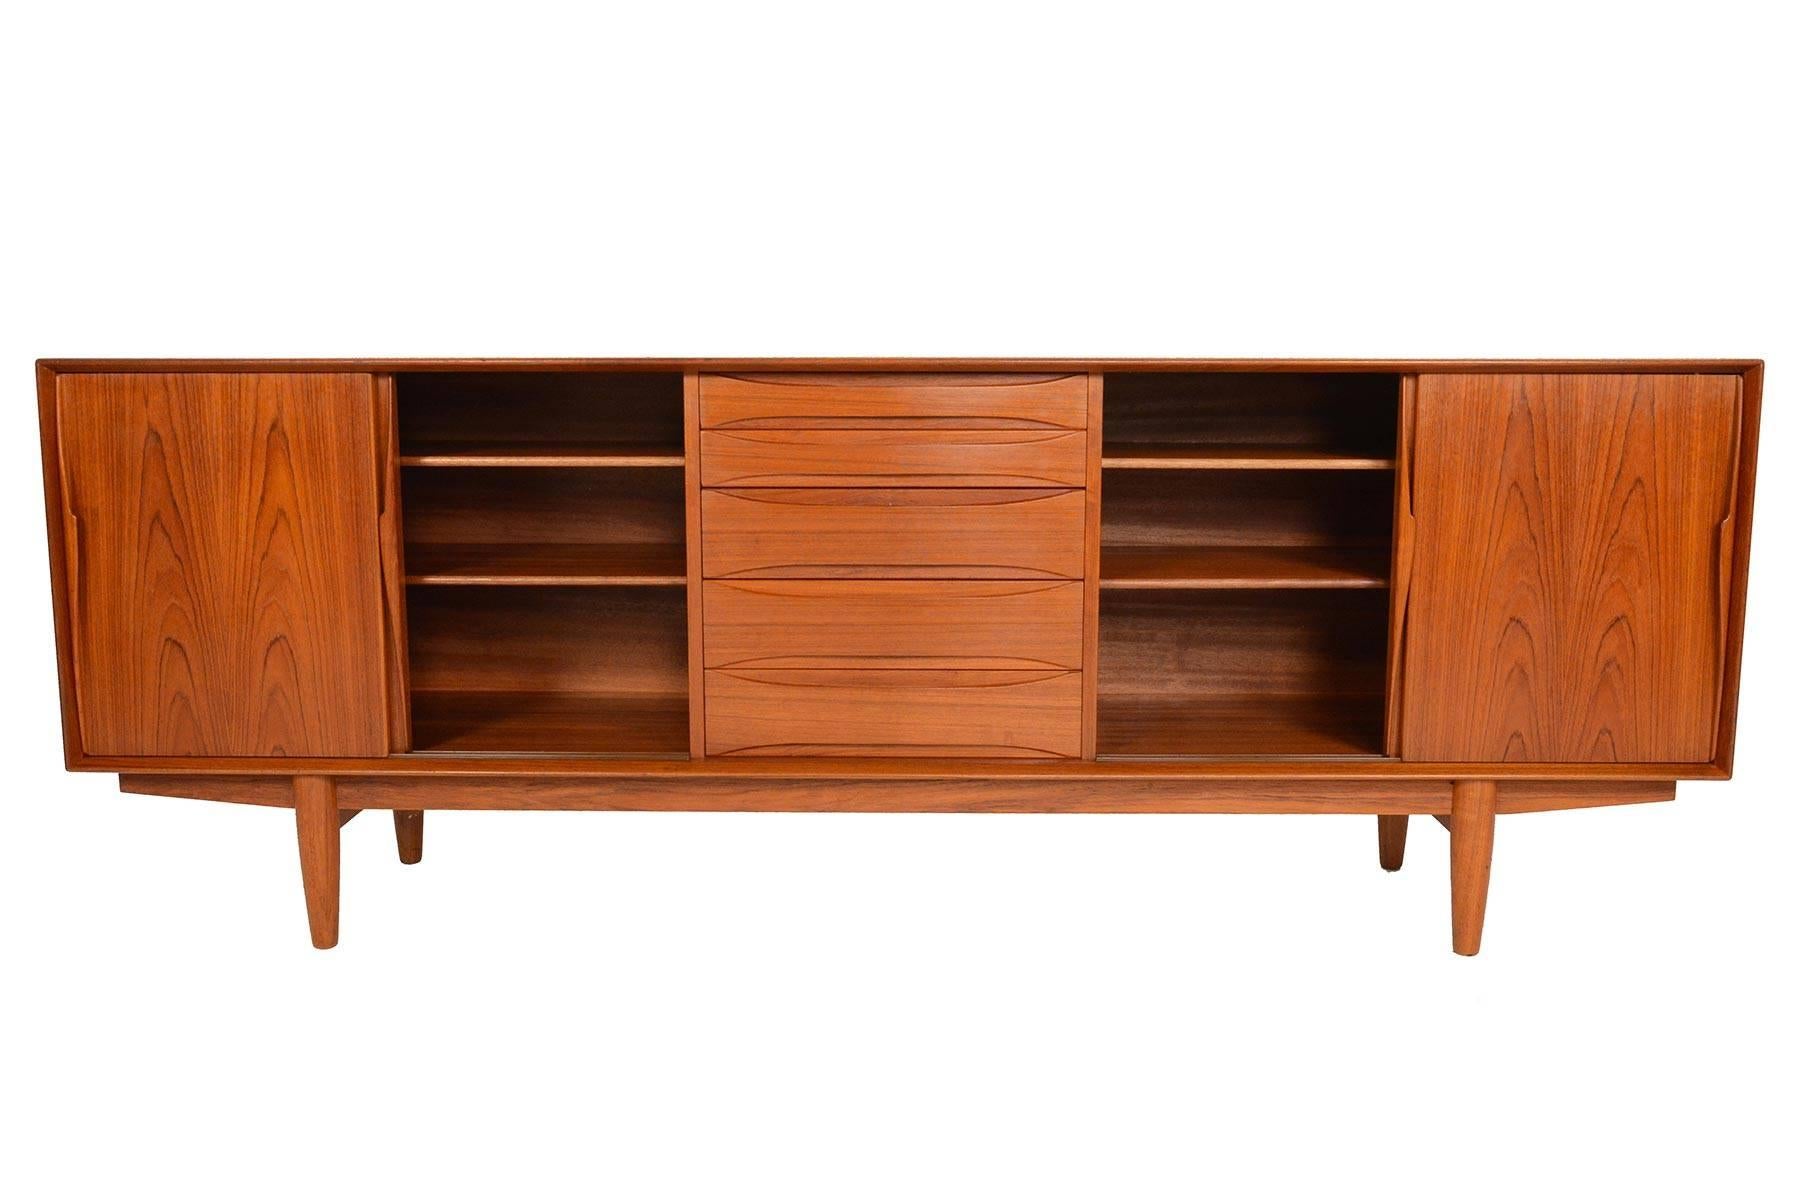 This gorgeous Danish modern midcentury credenza was manufactured by Dyrlund in the 1960s. Beautifully sculpted teak door pulls flank two large doors on each side, which slide open to reveal adjustable shelving. Five centre drawers accented by